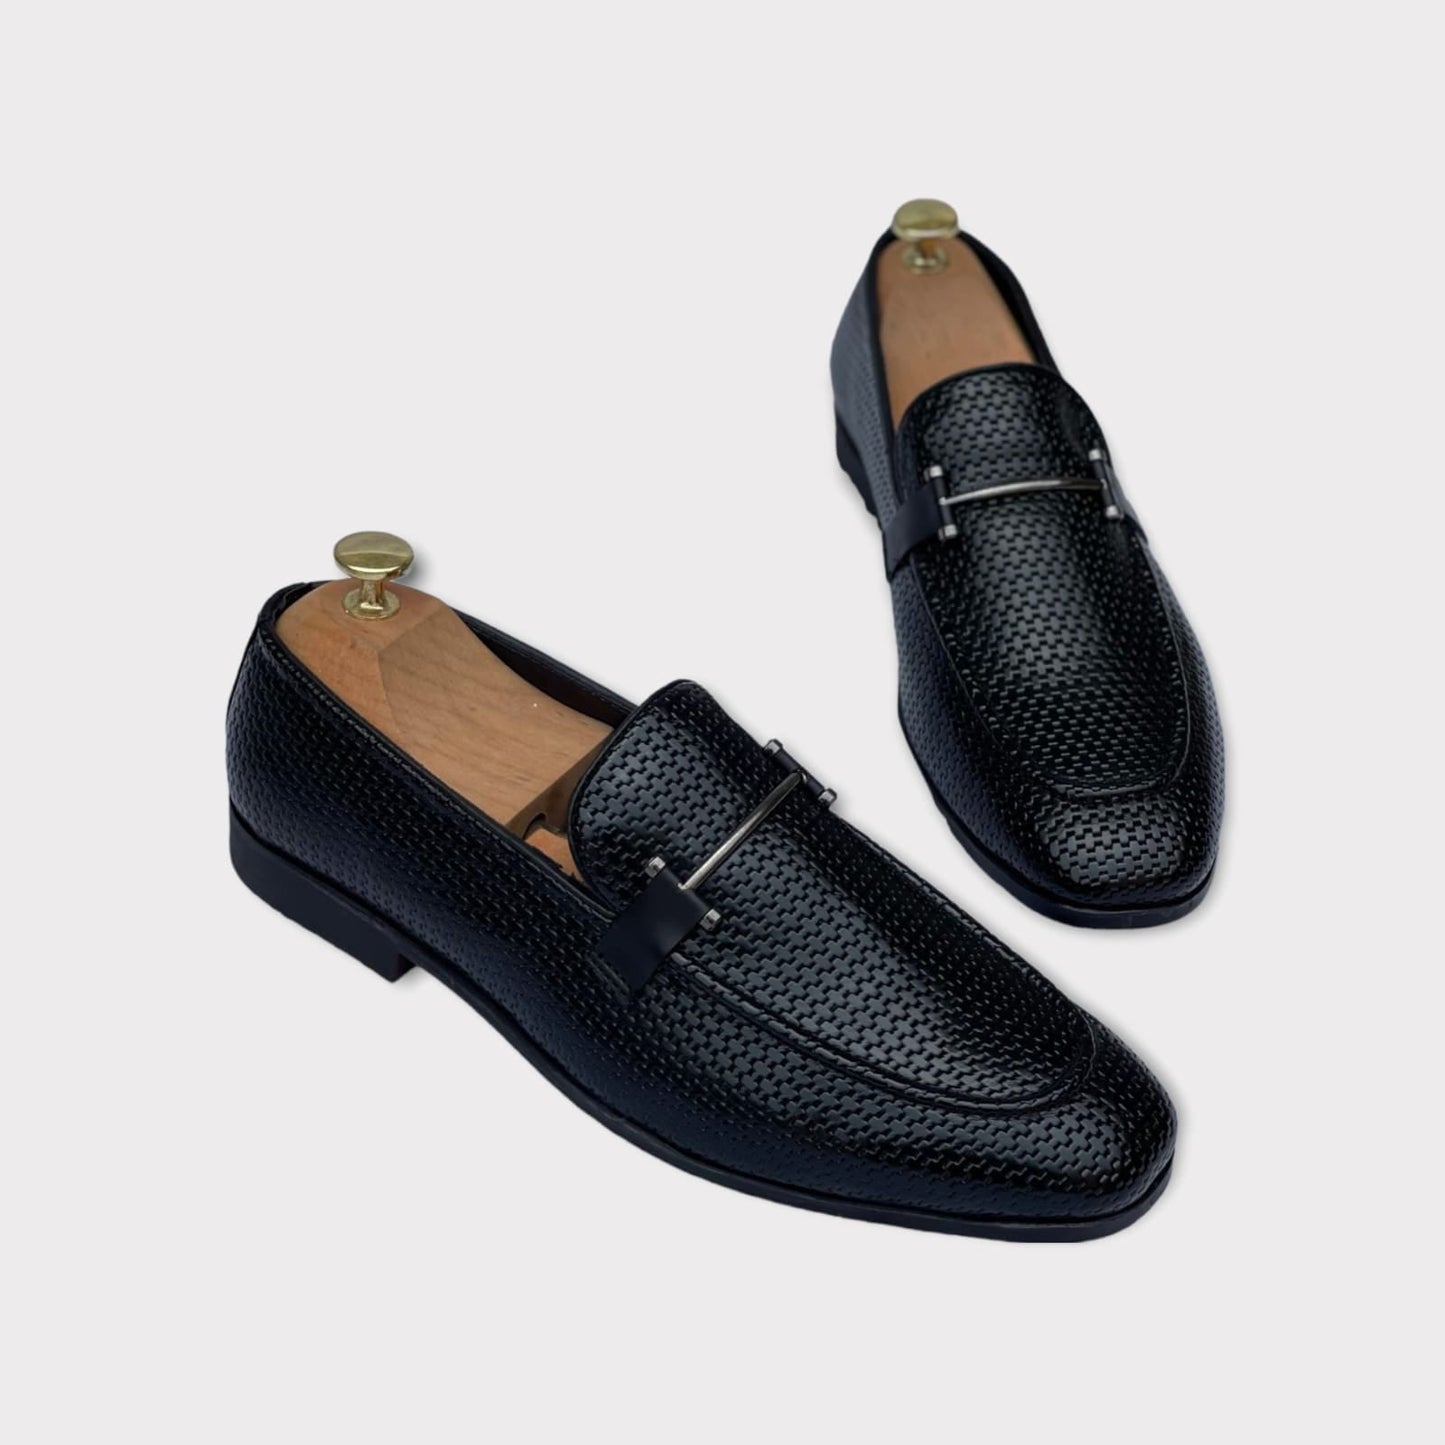 Buy New Fashion Loafers For Men Party and Casual Wear - Sunglassesmart